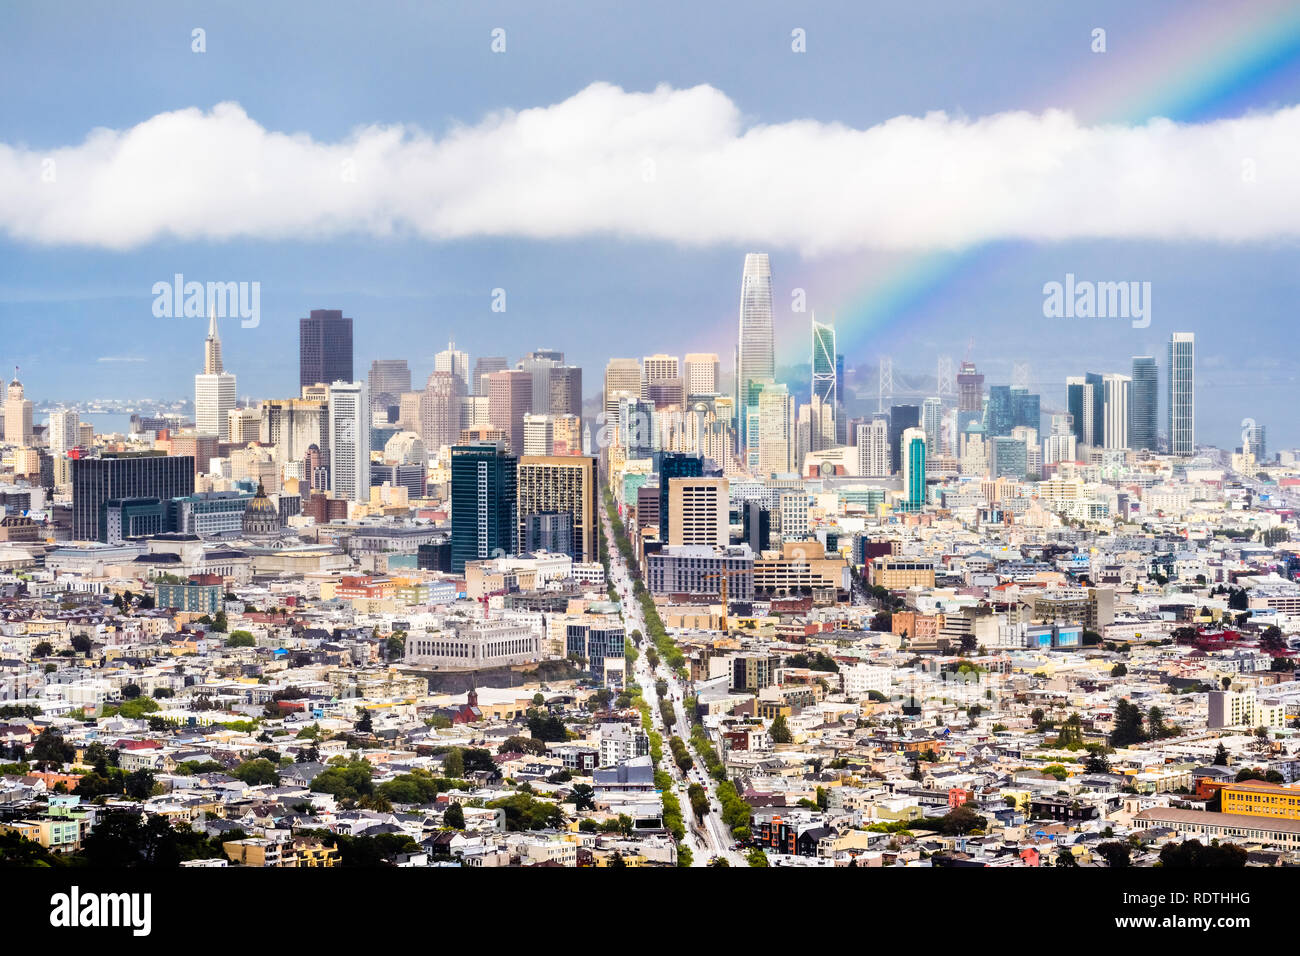 Aerial view of San Francisco's financial district skyline on a rainy day, bright rainbow rising from downtown; April 2018 Stock Photo